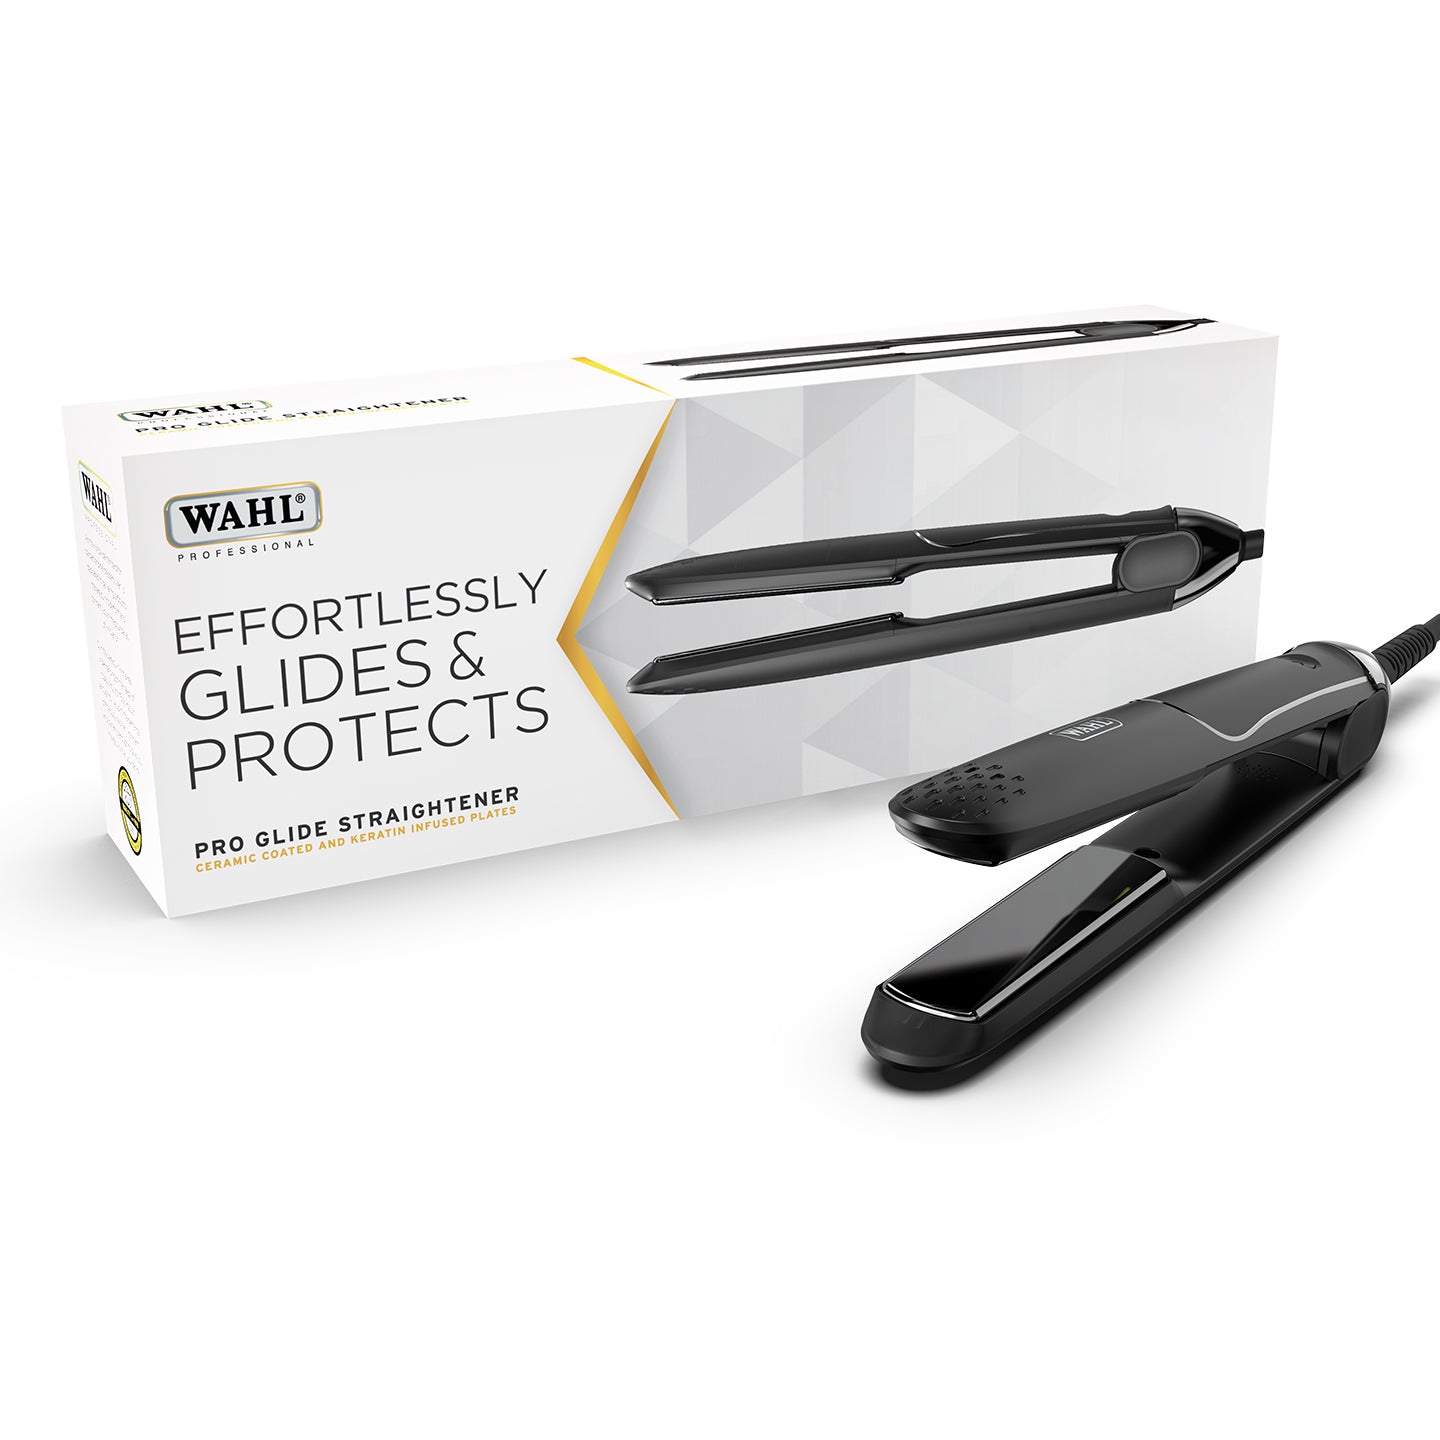 Wahl Pro Glide Straightener - Ultimate Hair and Beauty